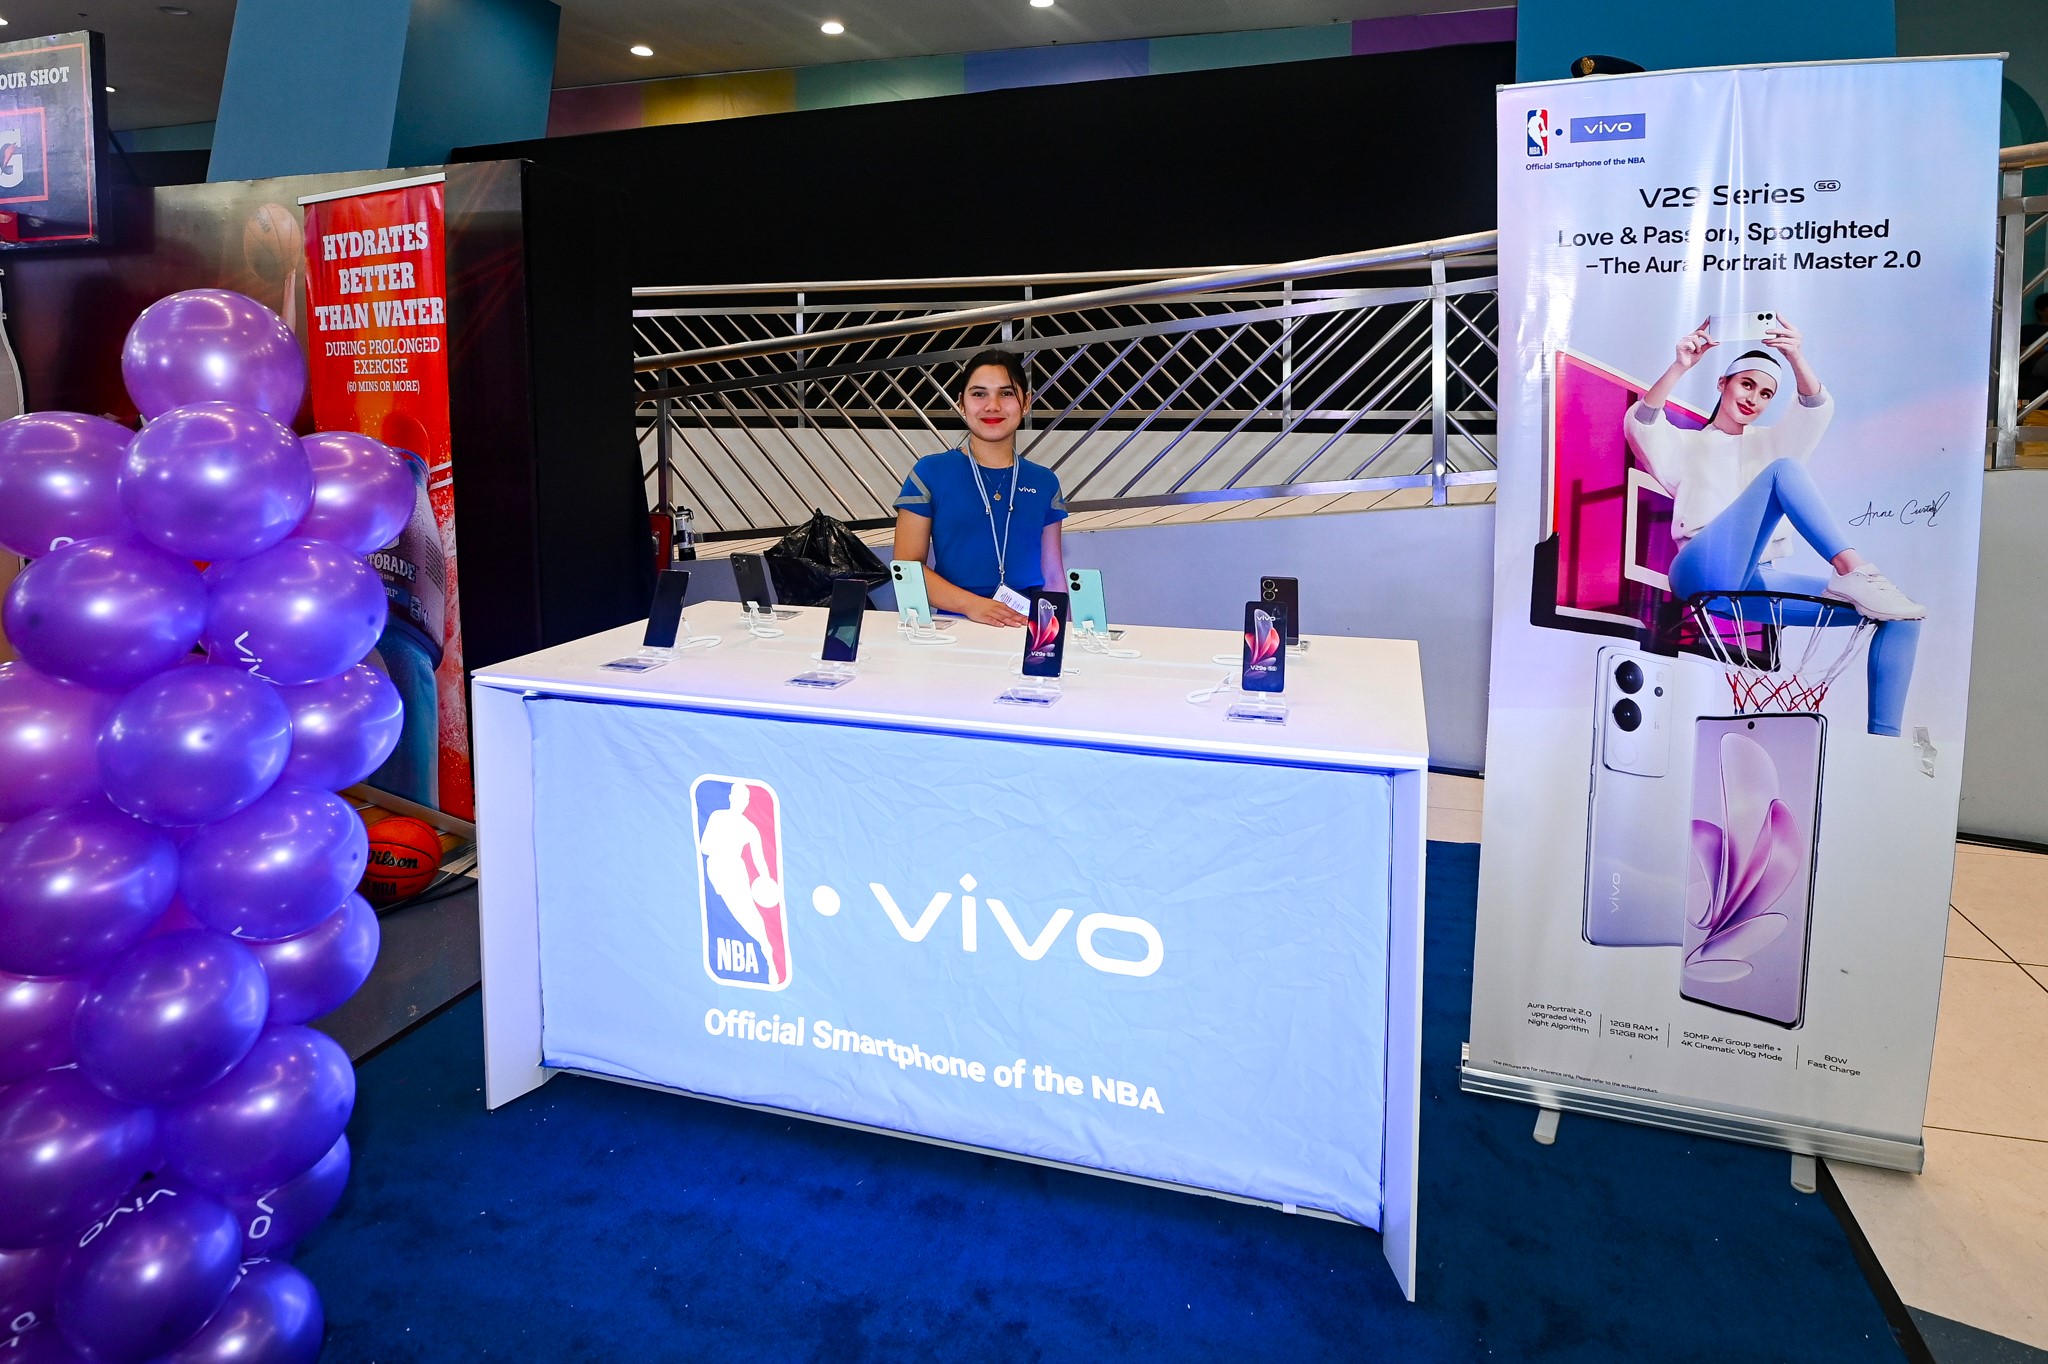 vivo brings heat to NBA 3X with V29 Series 5G plus thrilling on-court activity